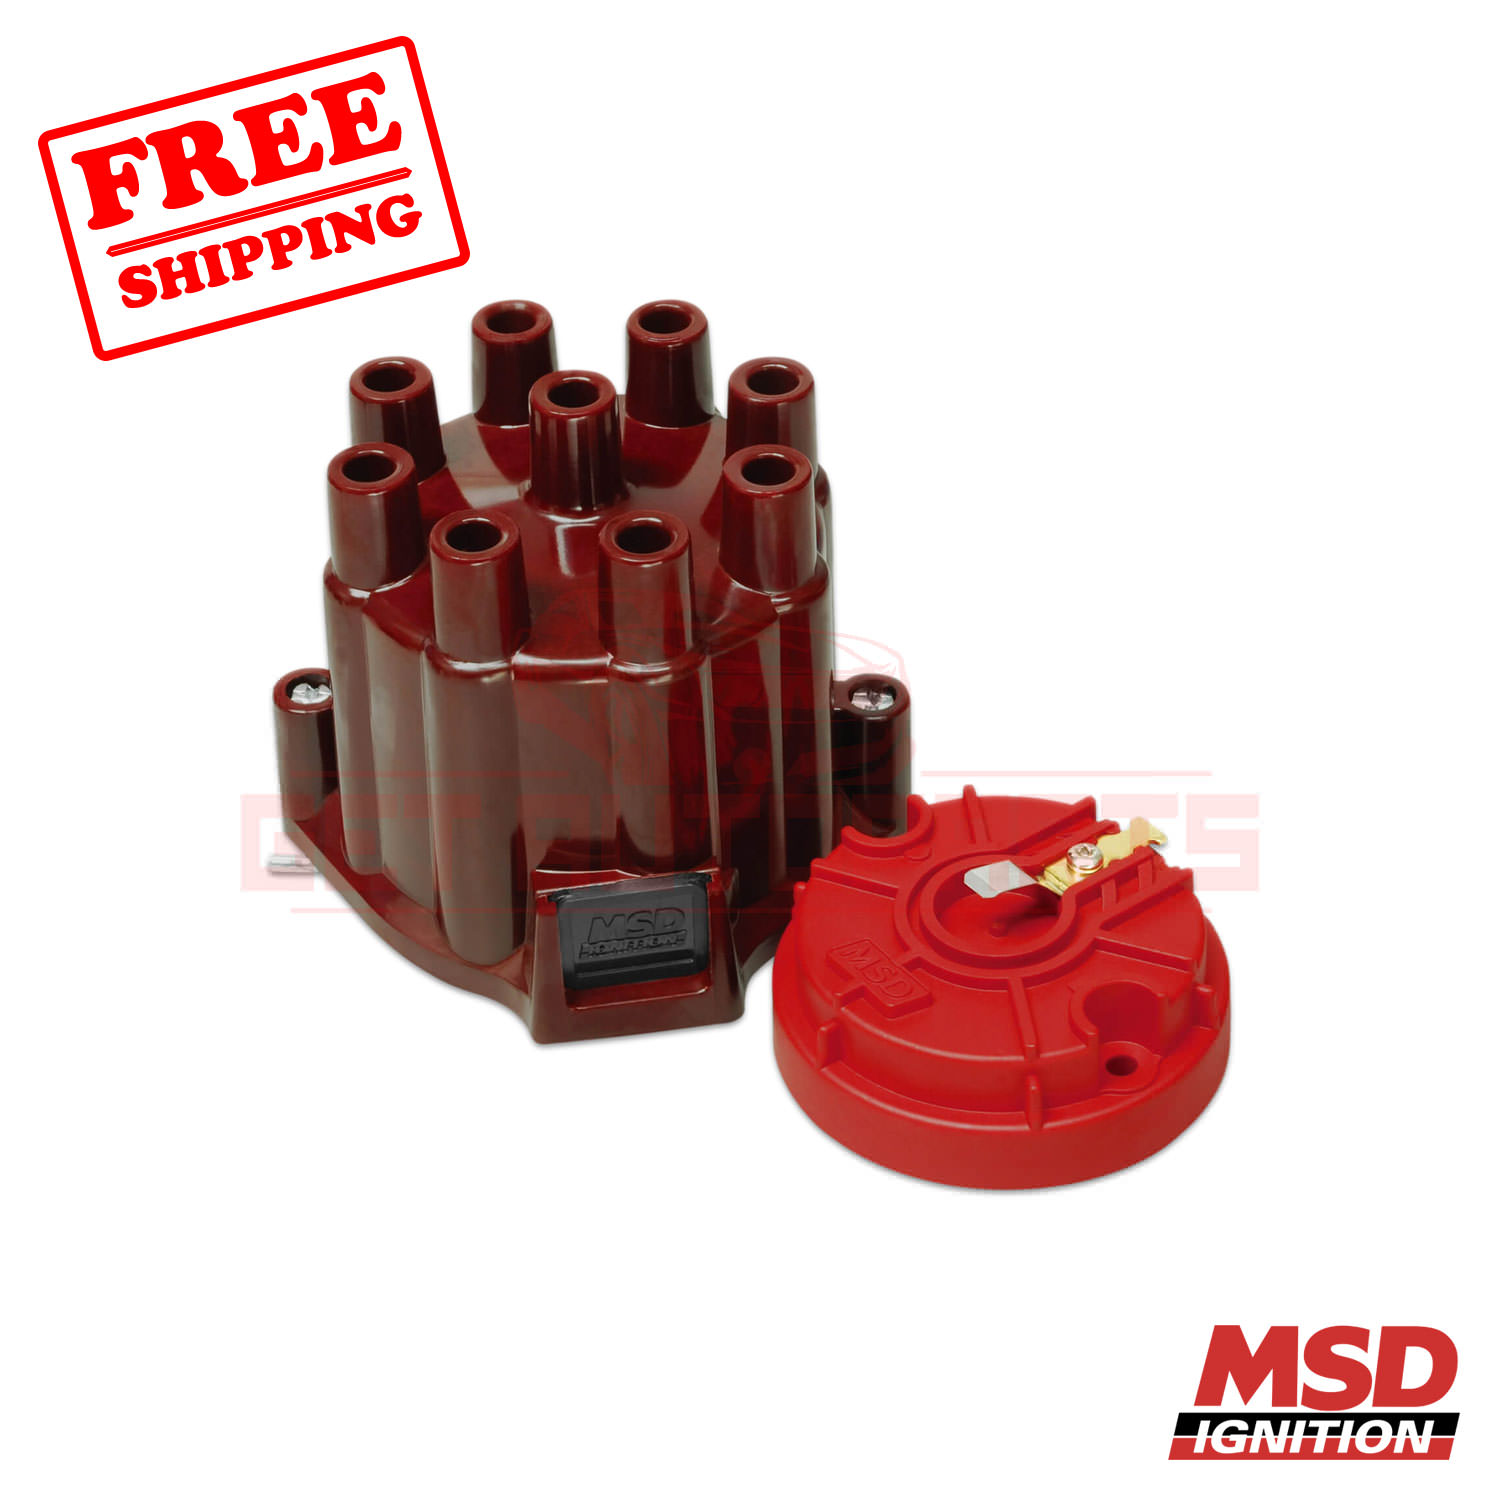 MSD Distributor Cap and Rotor Kit fits with Chevrolet Suburban 6